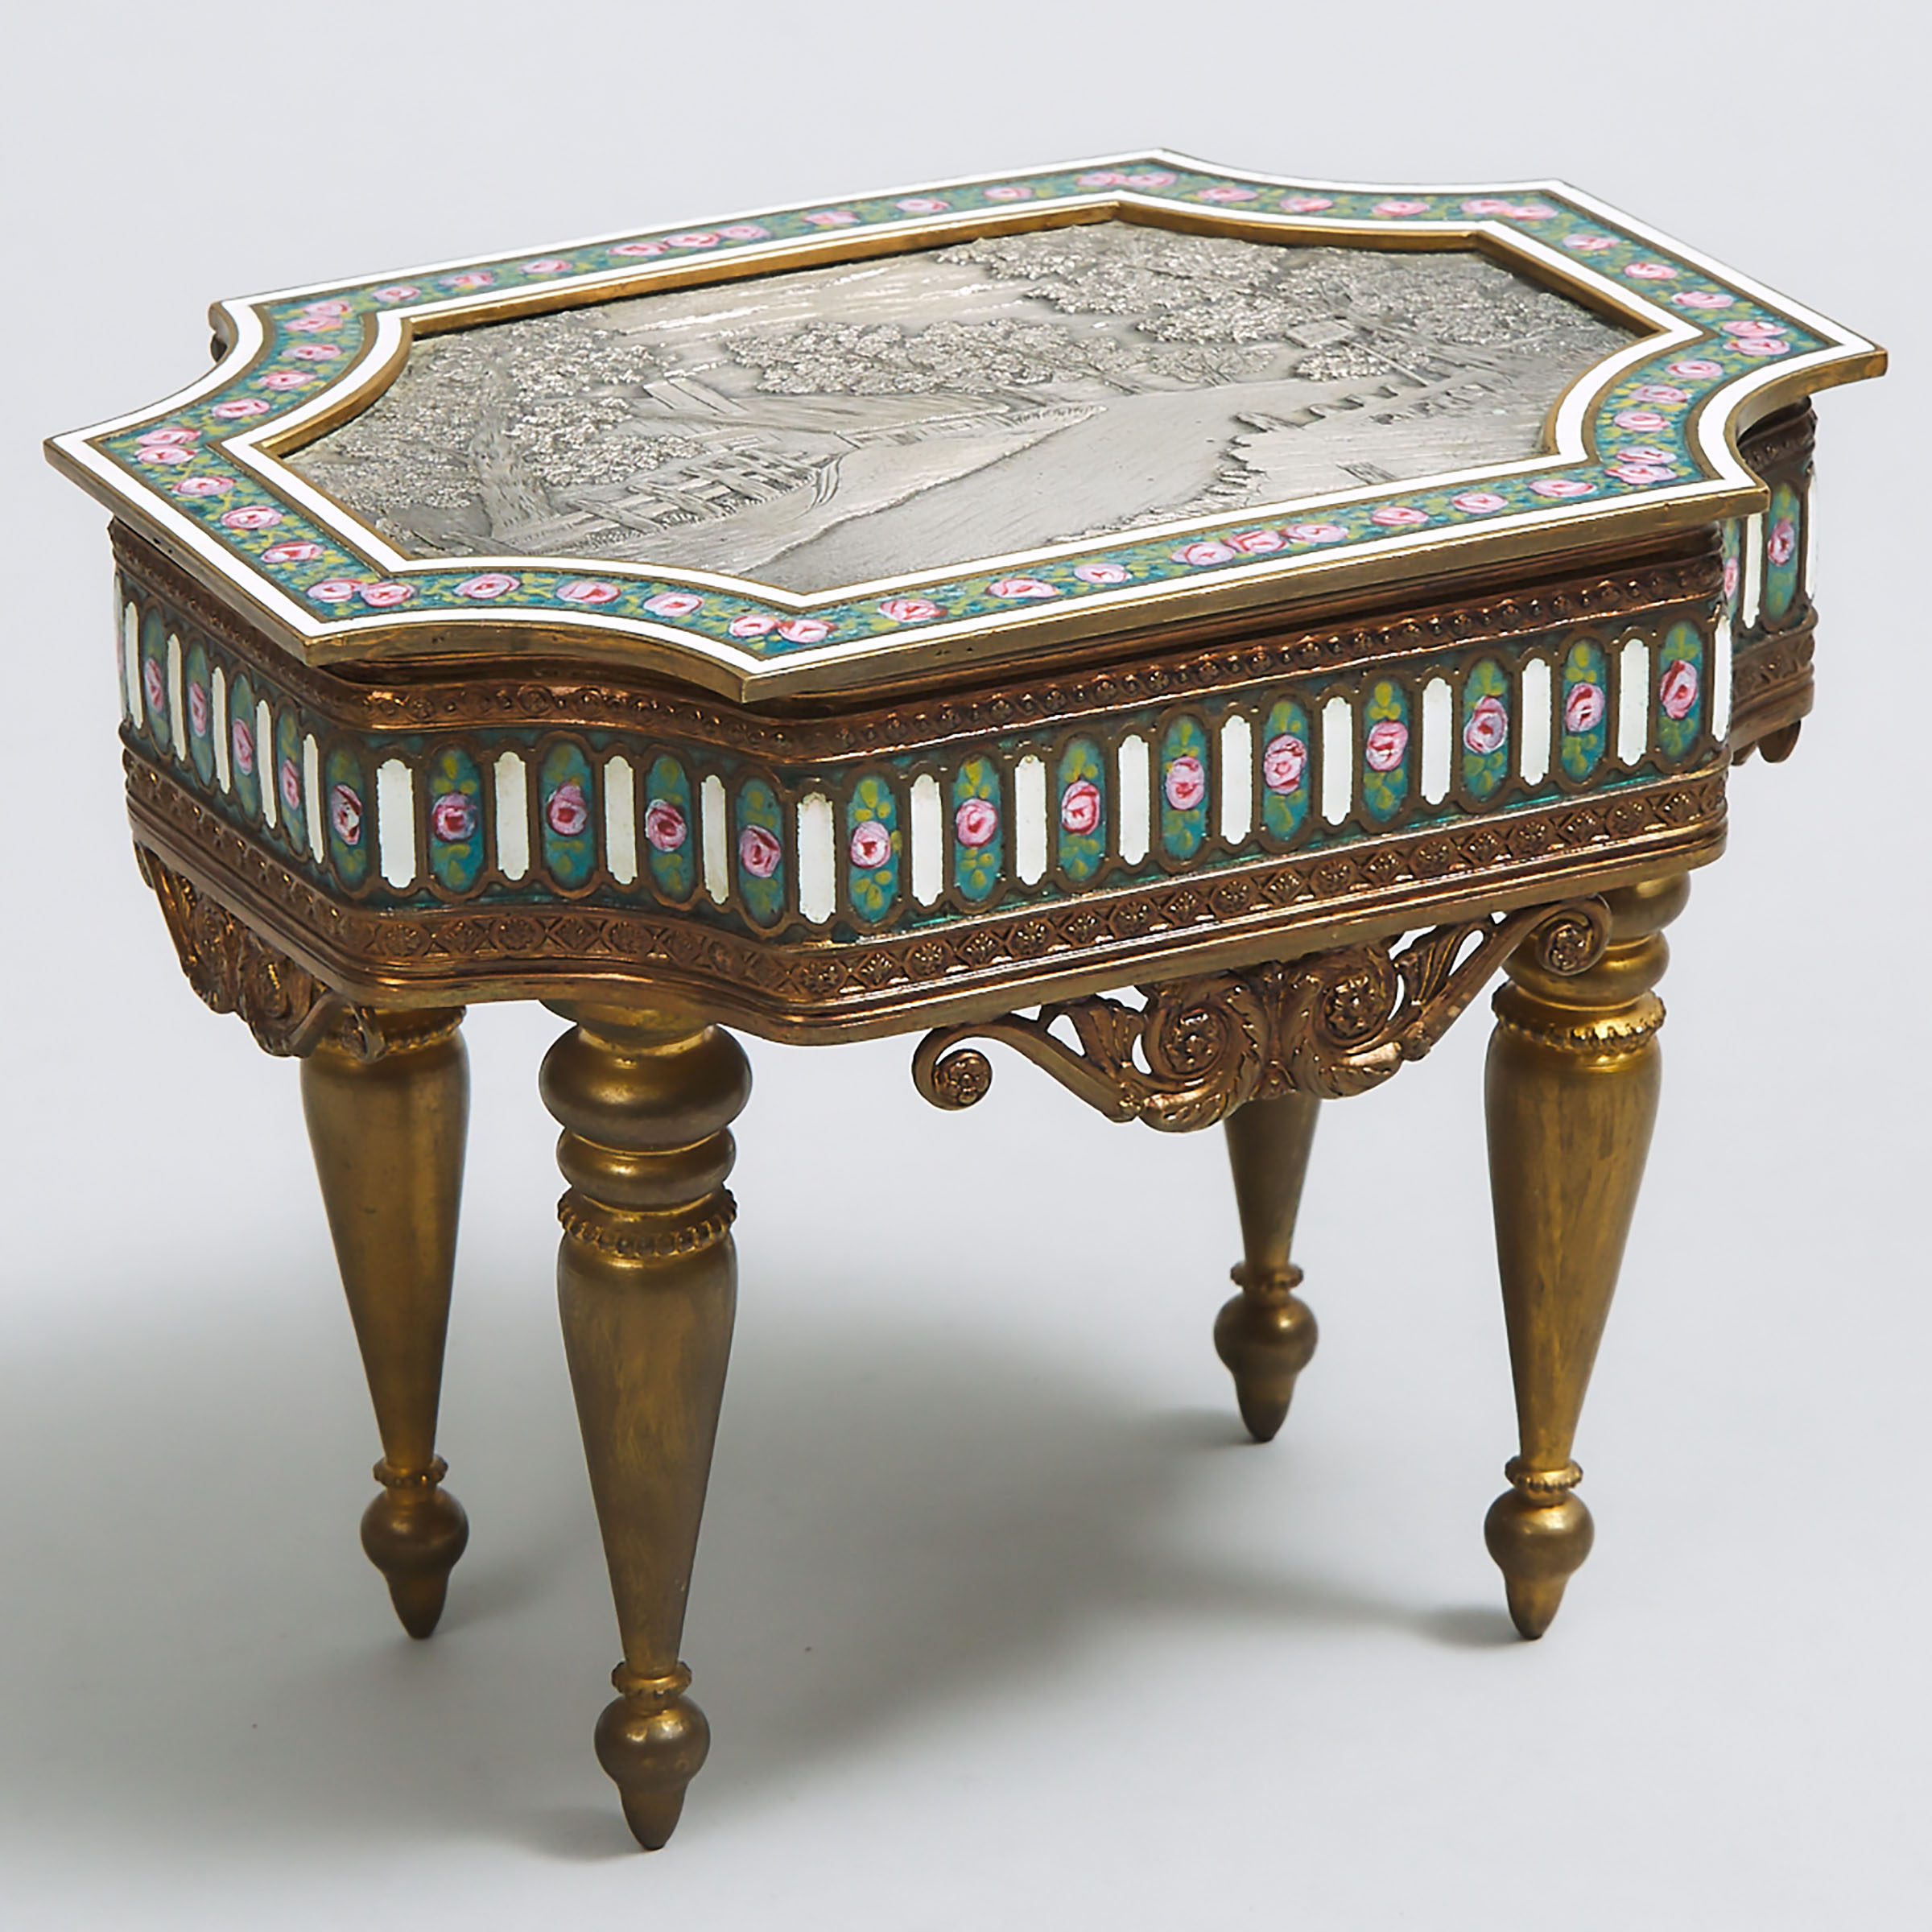 French Enamelled Gilt Bronze and Micro Mosaic Jewellery Casket, early 20th century